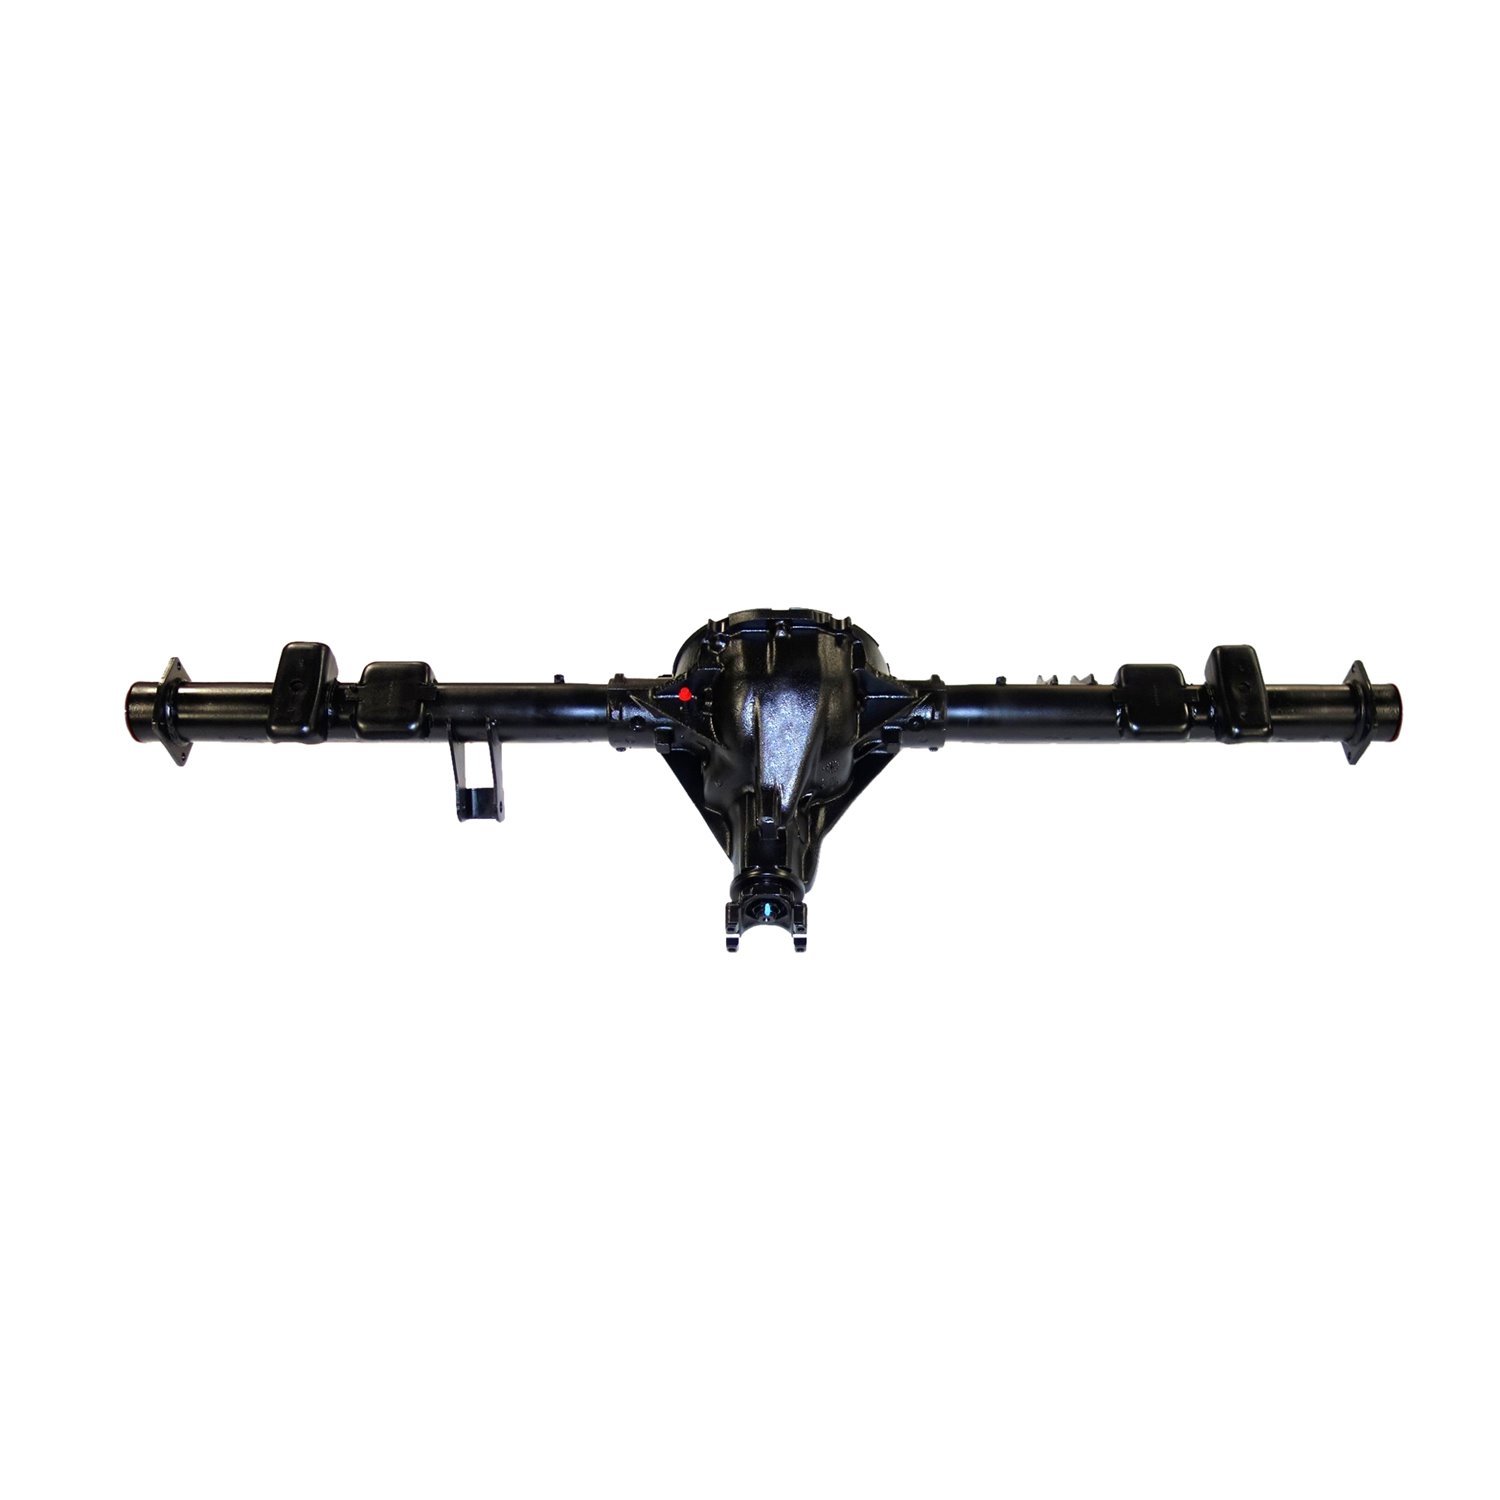 Remanufactured Complete Rear Axle Assembly 1992-2000 GM 8.5